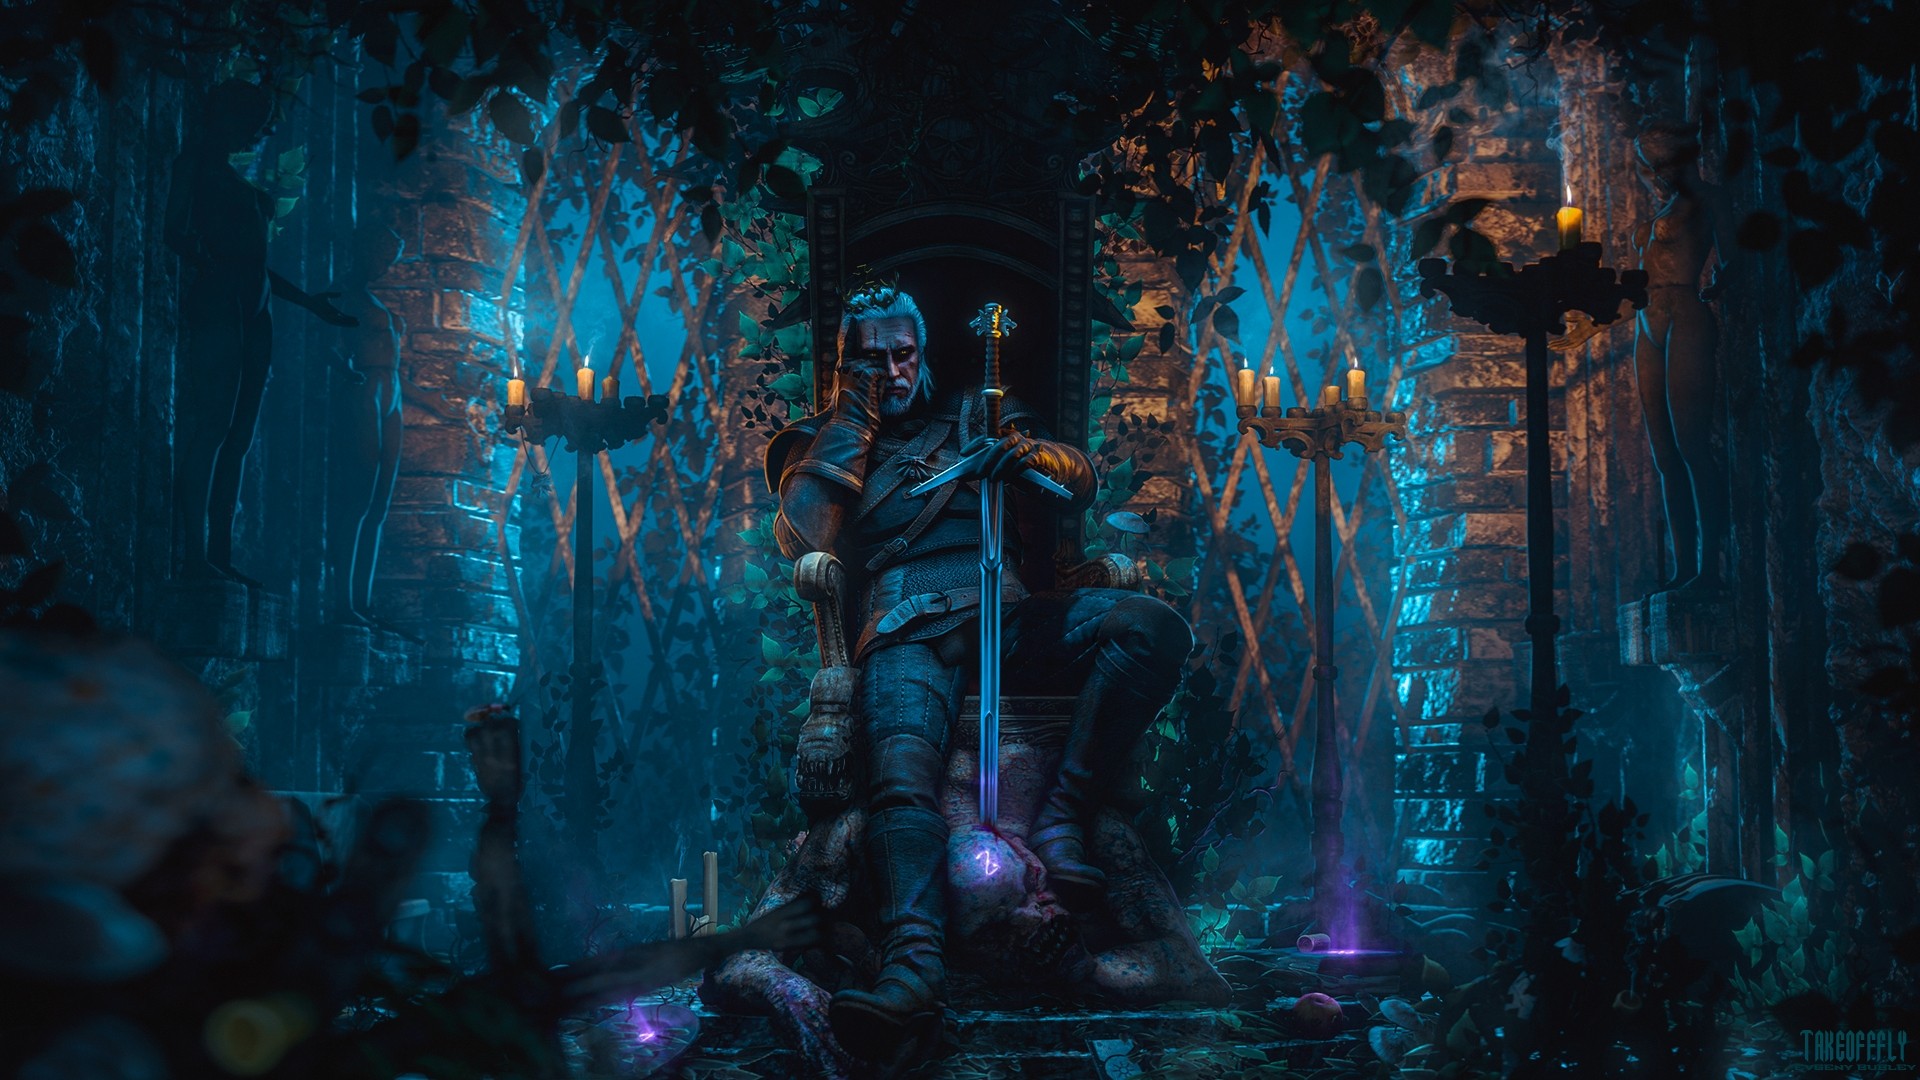 The witcher 3 art 4k фото 4